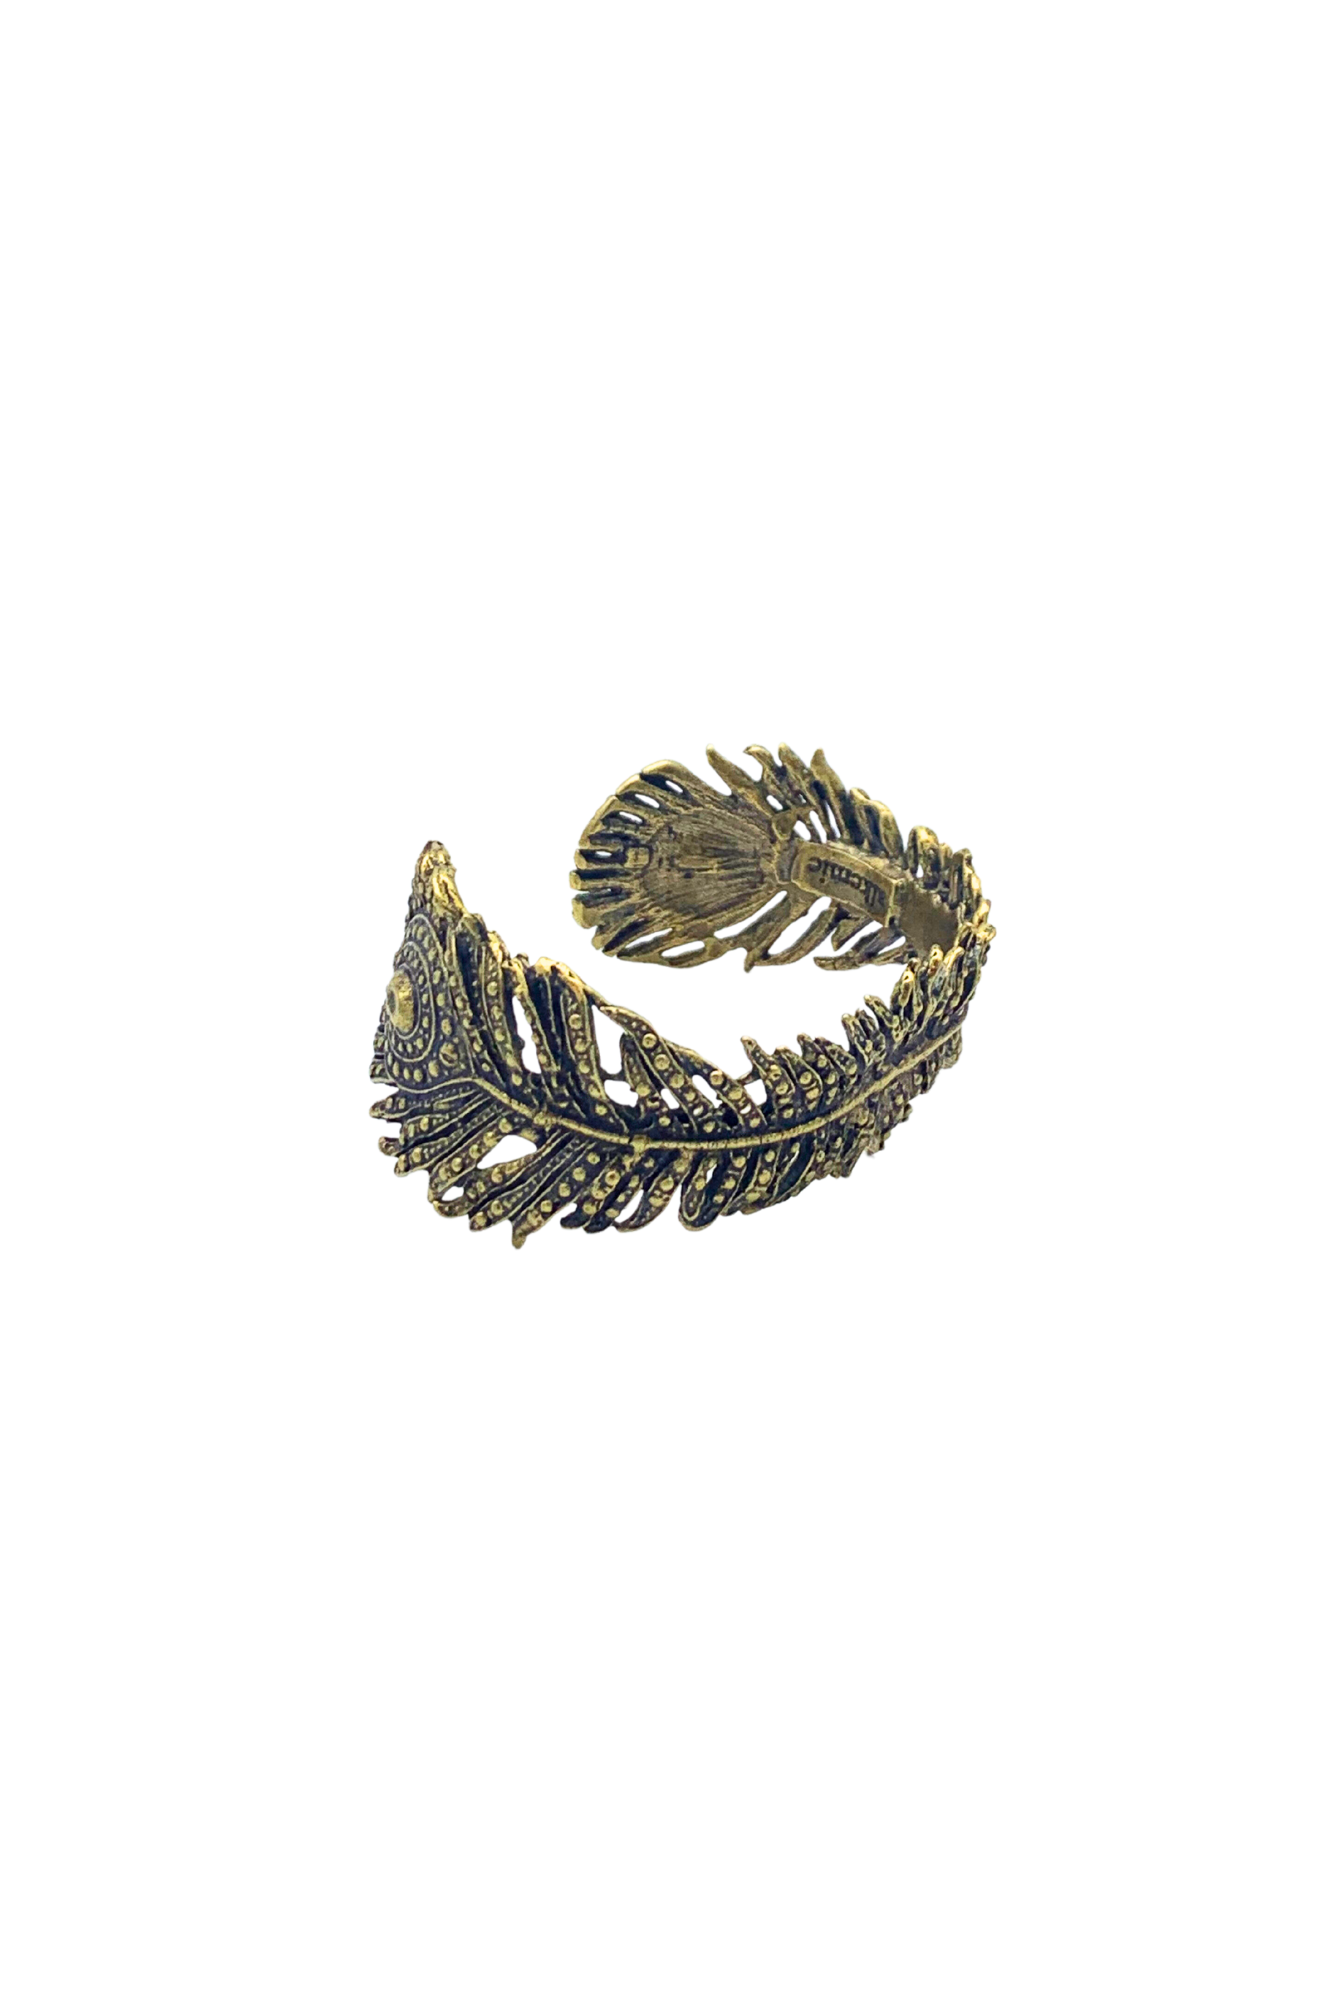 Peacock Feather Cuff